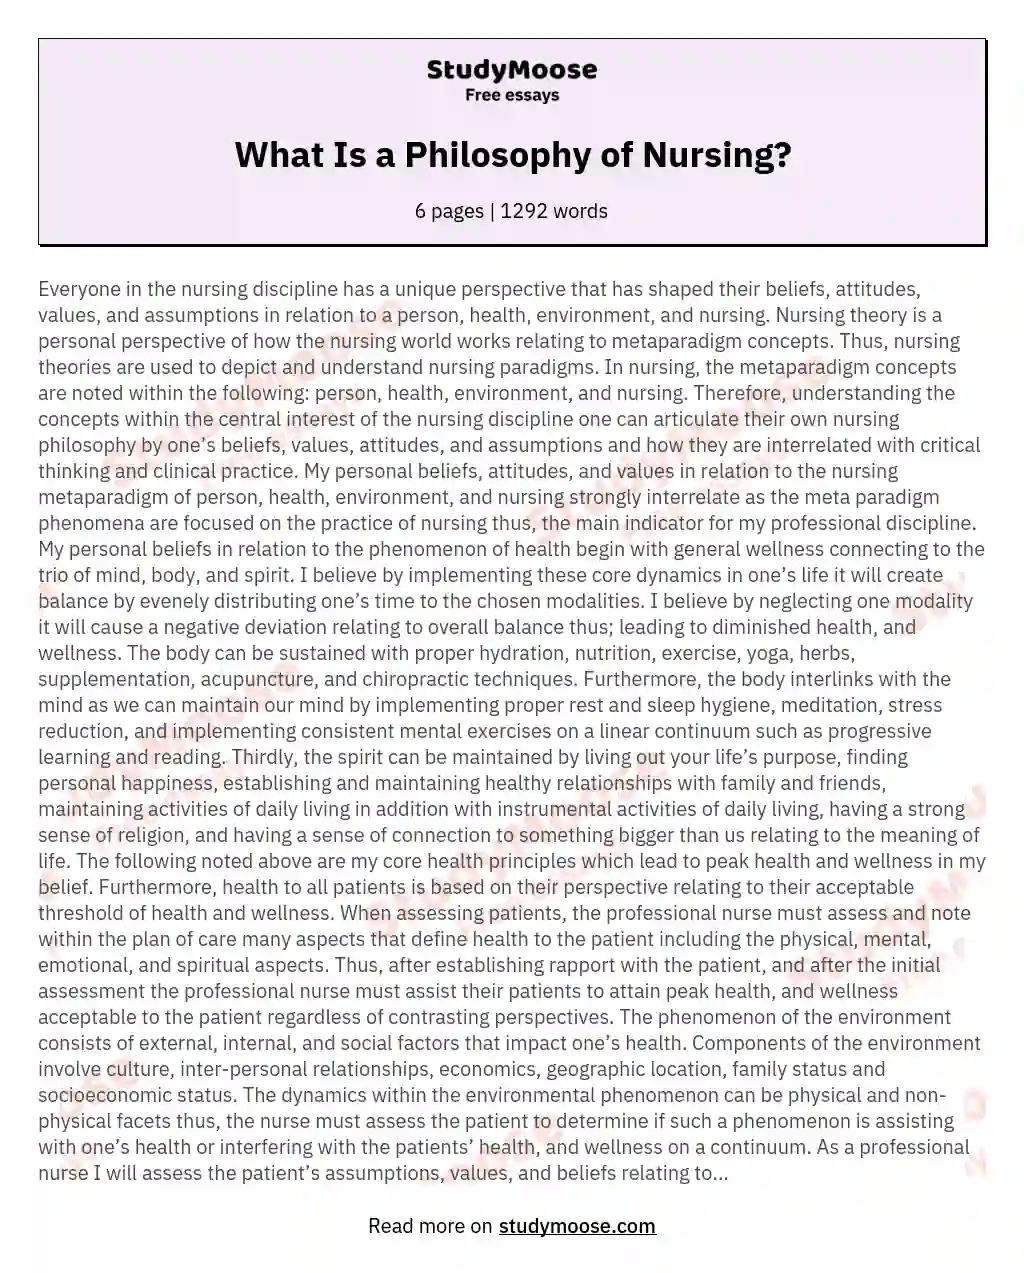 What Is a Philosophy of Nursing? essay